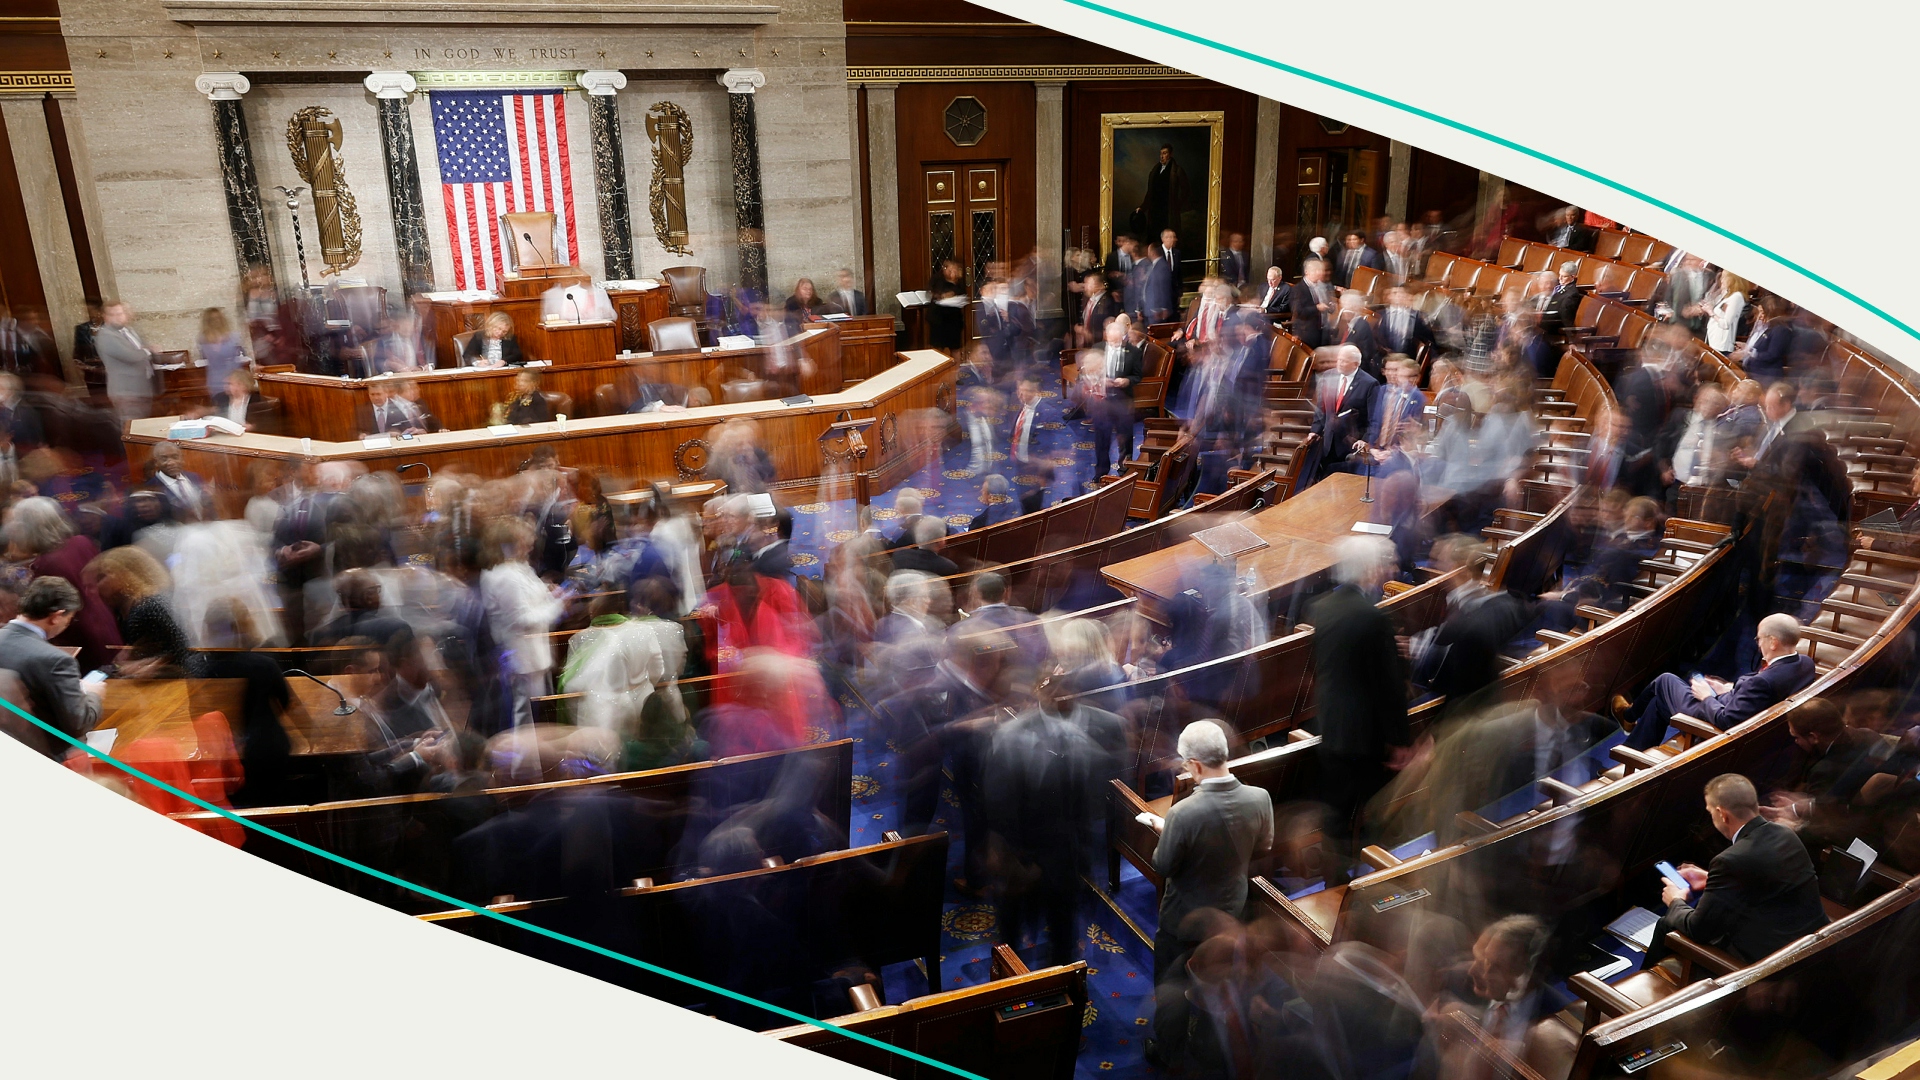 Members-elect of the 118th Congress leave the House Chamber after three ballots failed to elect a new Speaker of the House at the U.S. Capitol Building on January 03, 2023 